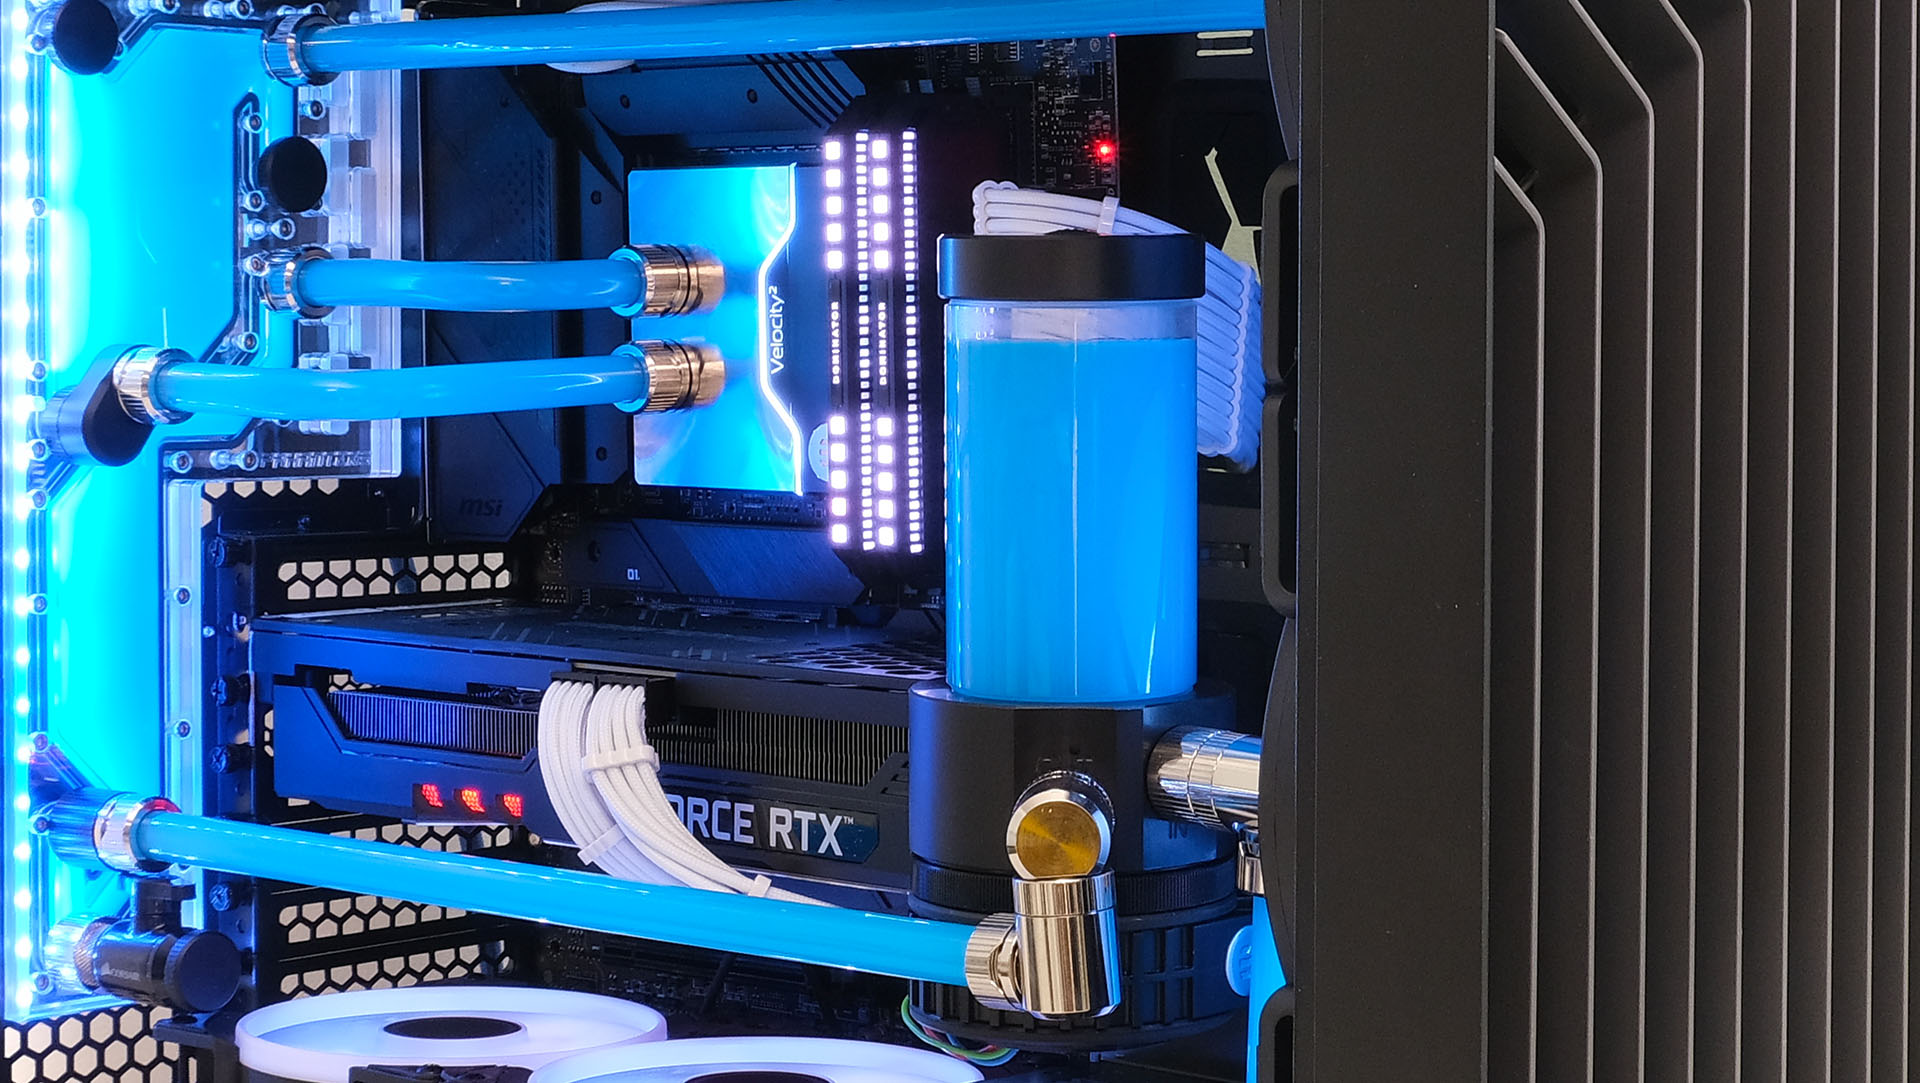 How to mount a reservoir in your PC case